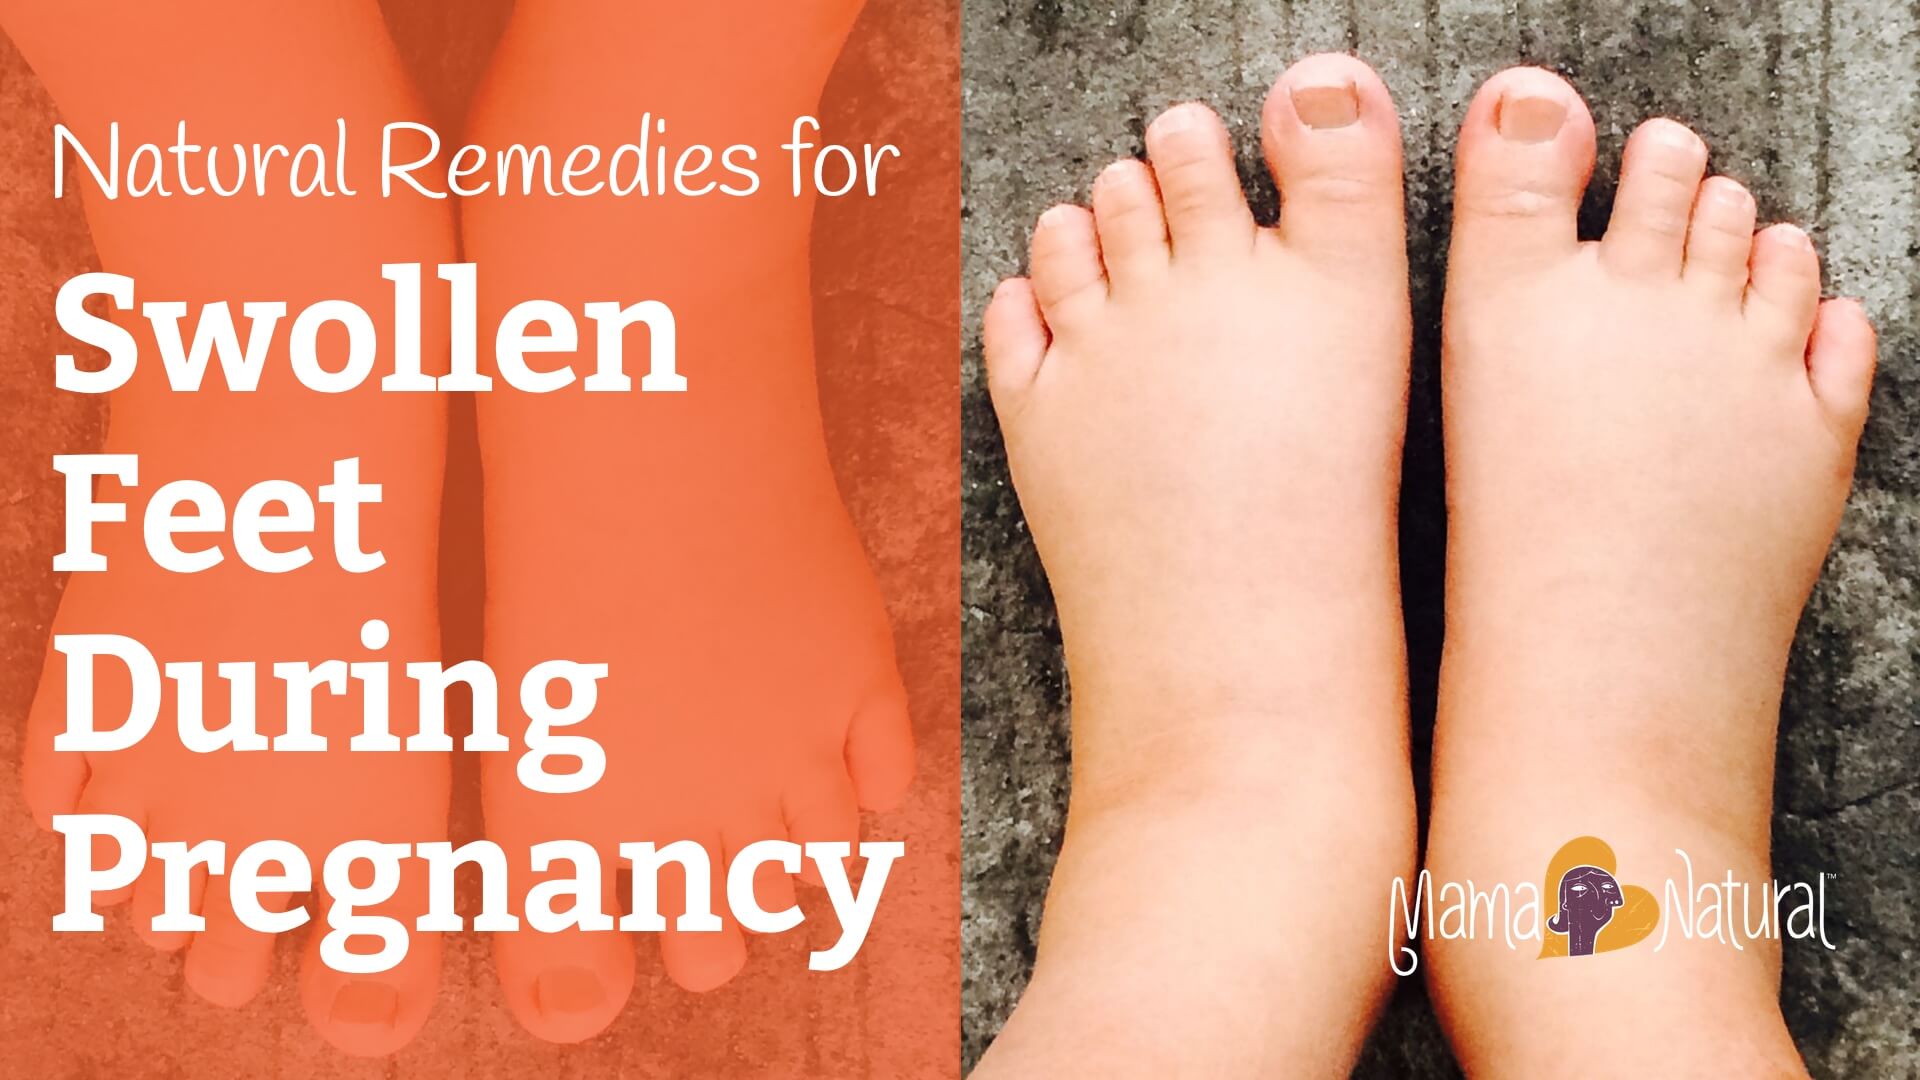 How To Reduce Feet Swelling During Pregnancy Stuffjourney Giggmohrbrothers